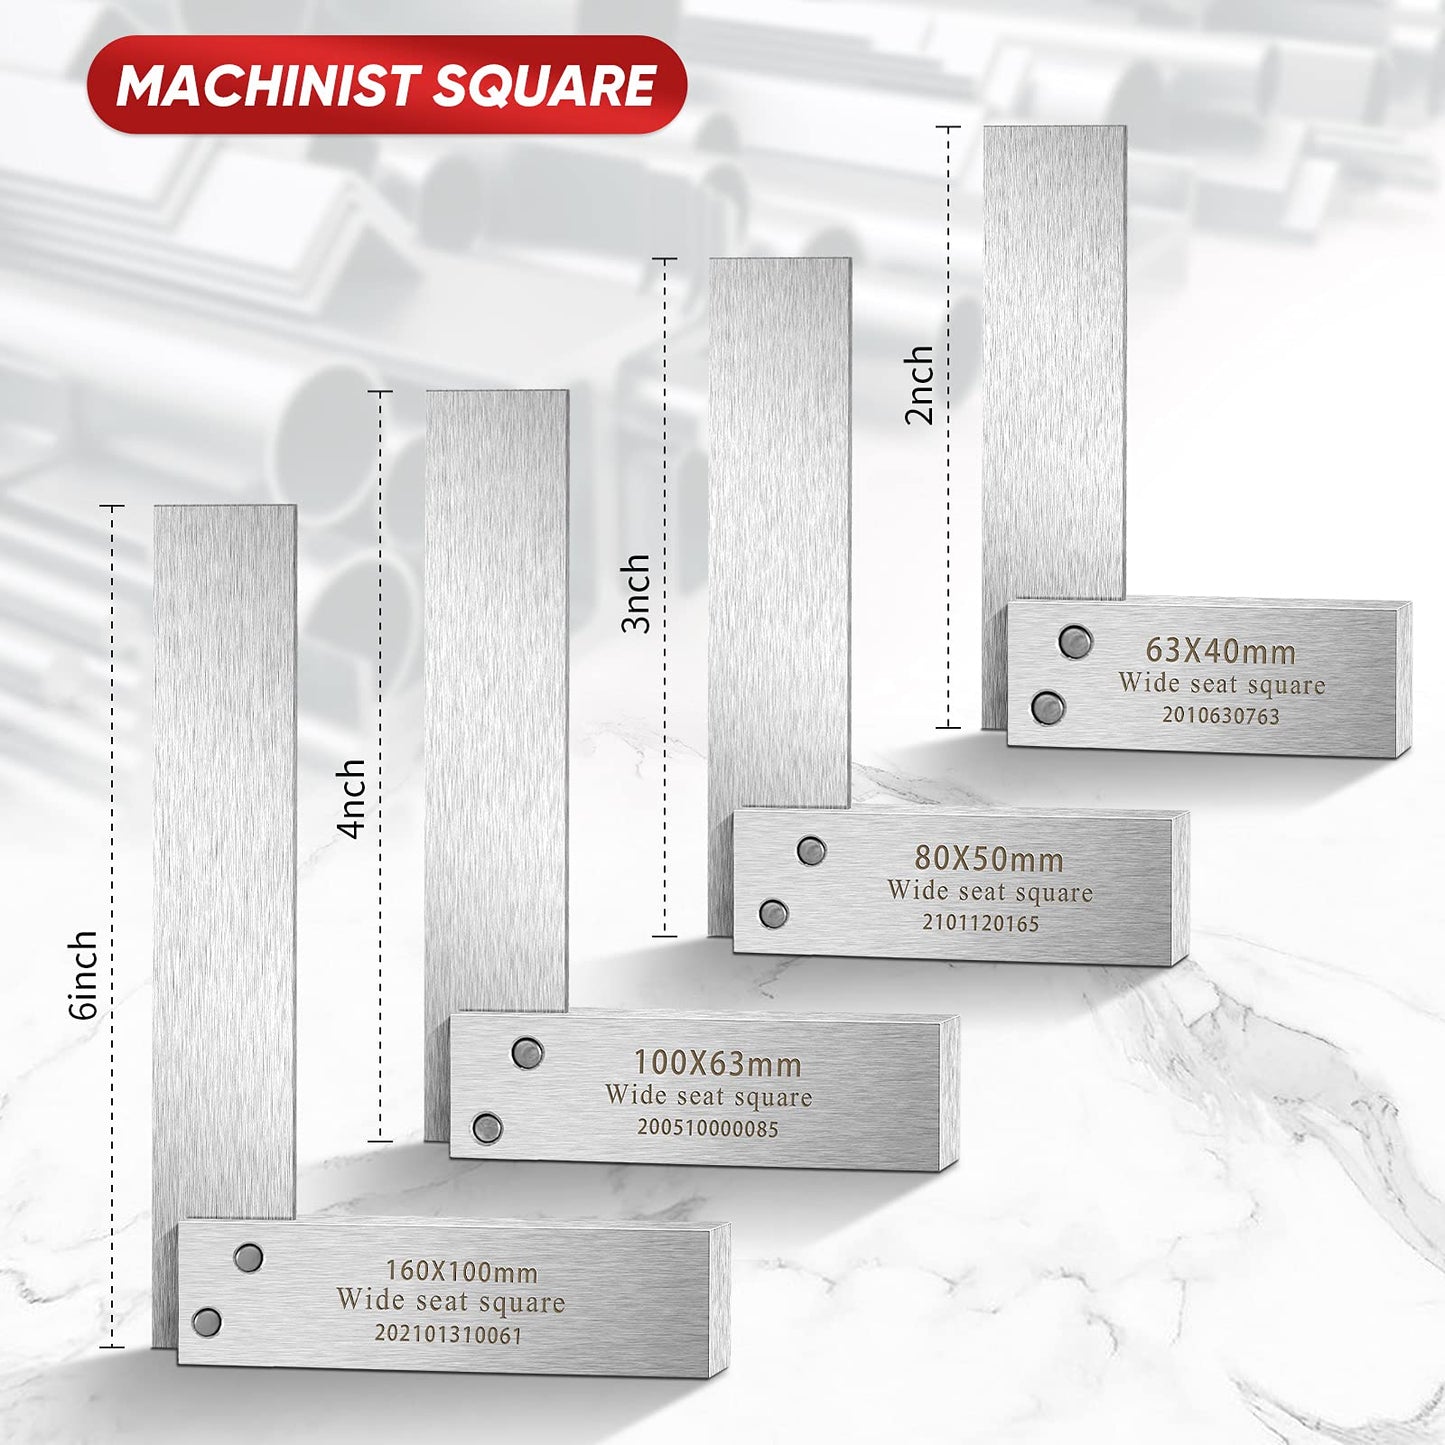 Machinist Square Set, 2, 3, 4 and 6 Squares Machinist Square Mechanical Engineer Steel Square High Precision 90 Degree Wide Base Square Tool L-type